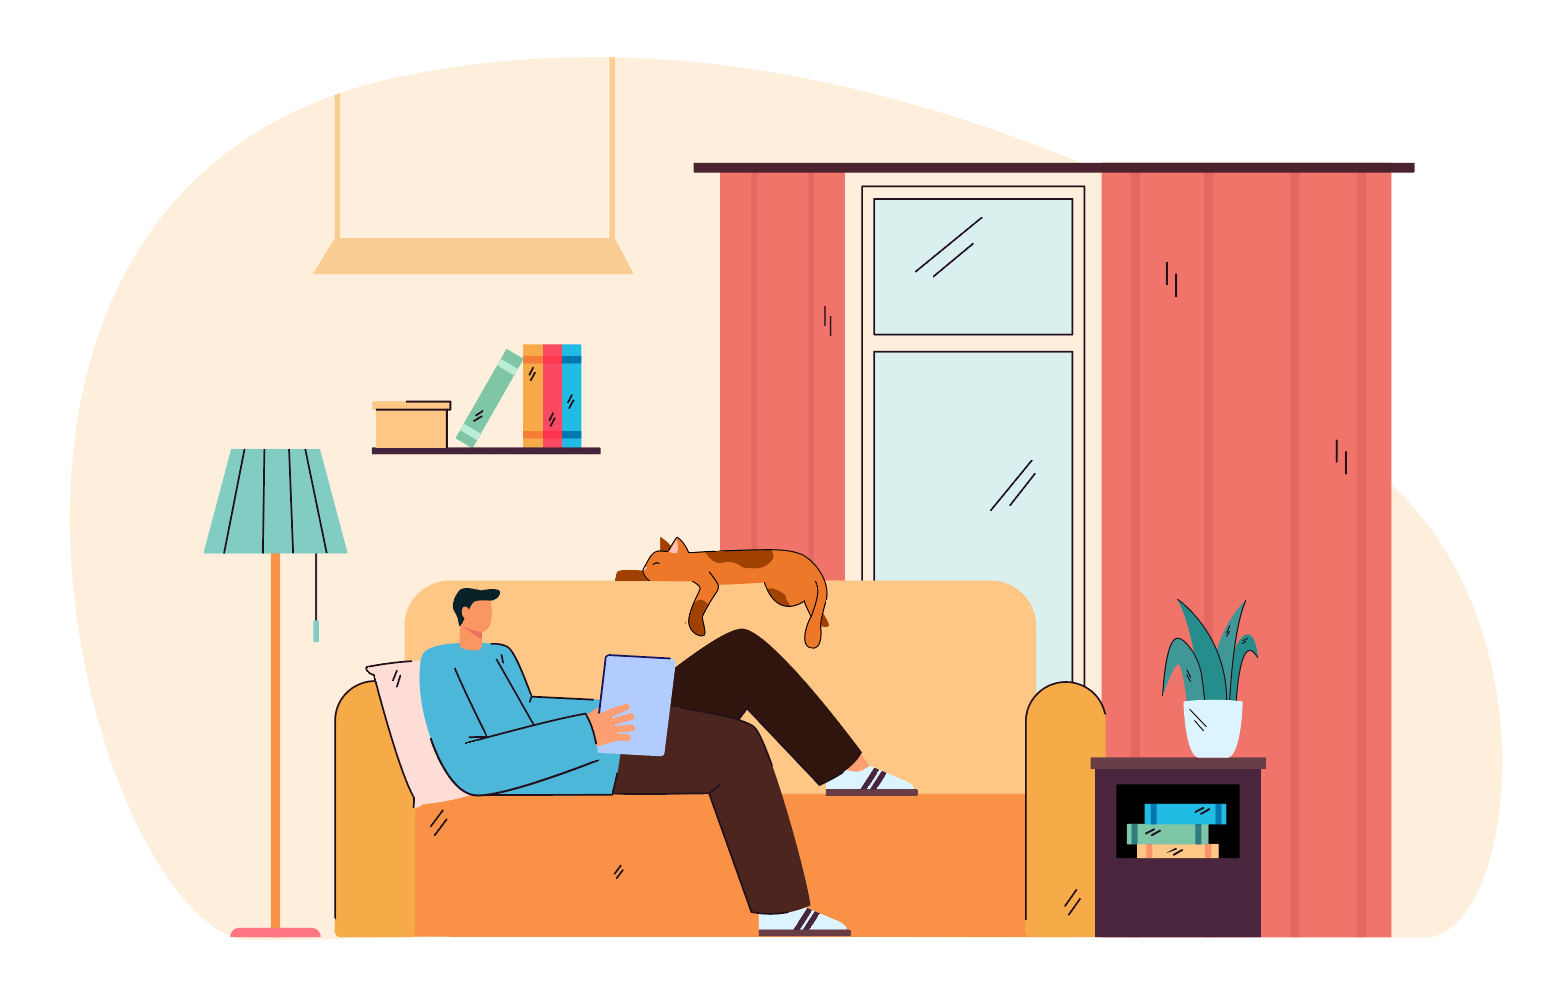 An illustration of a man sitting on his couch in his apartment. A cat sleeps on the back of the couch.